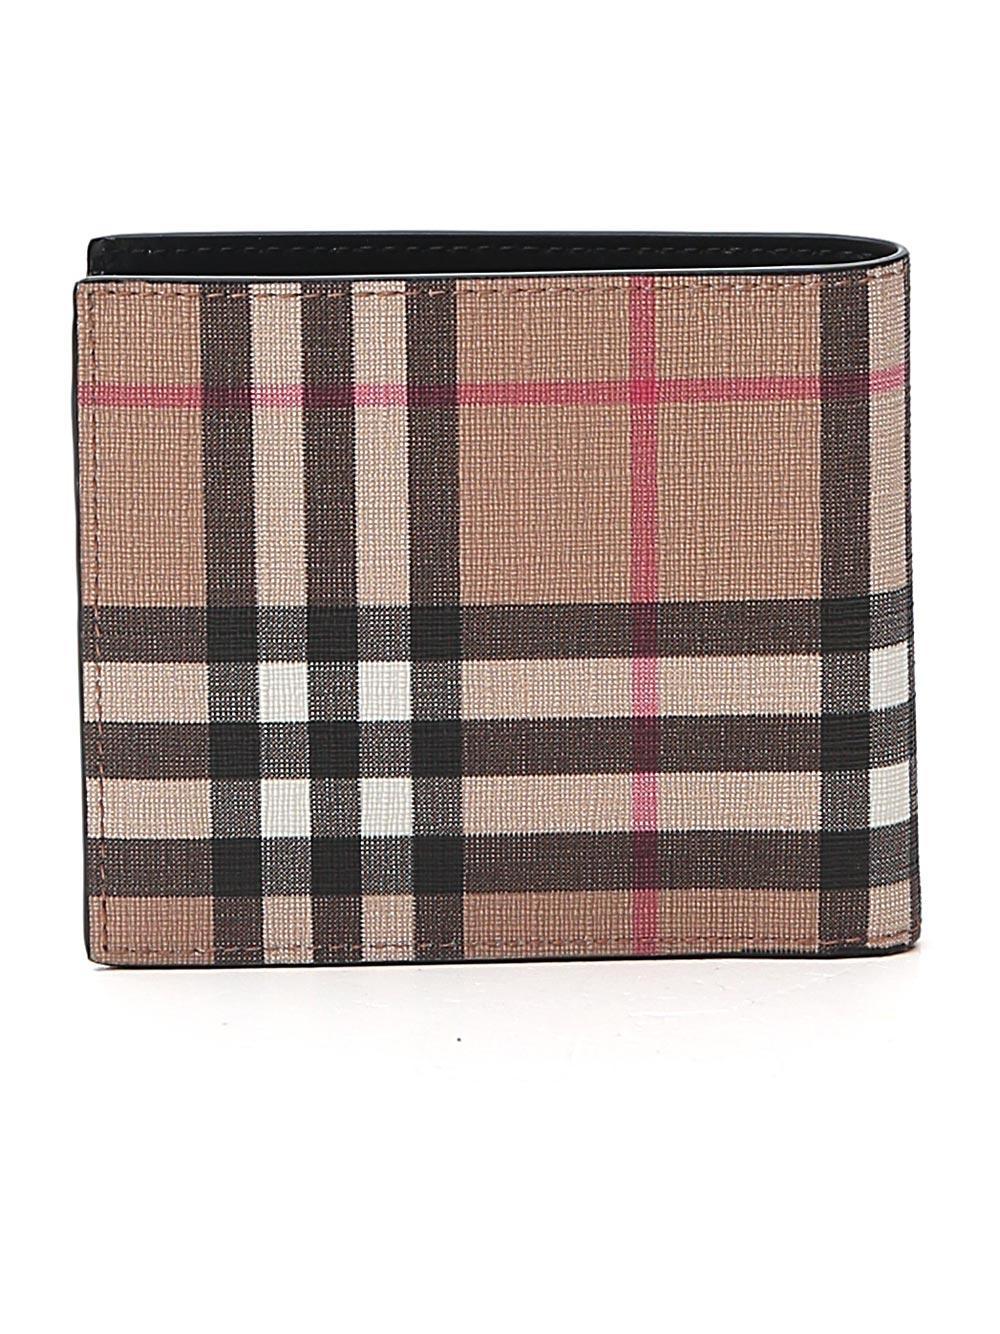 Burberry Vintage Check E-canvas Continental Wallet in Beige 